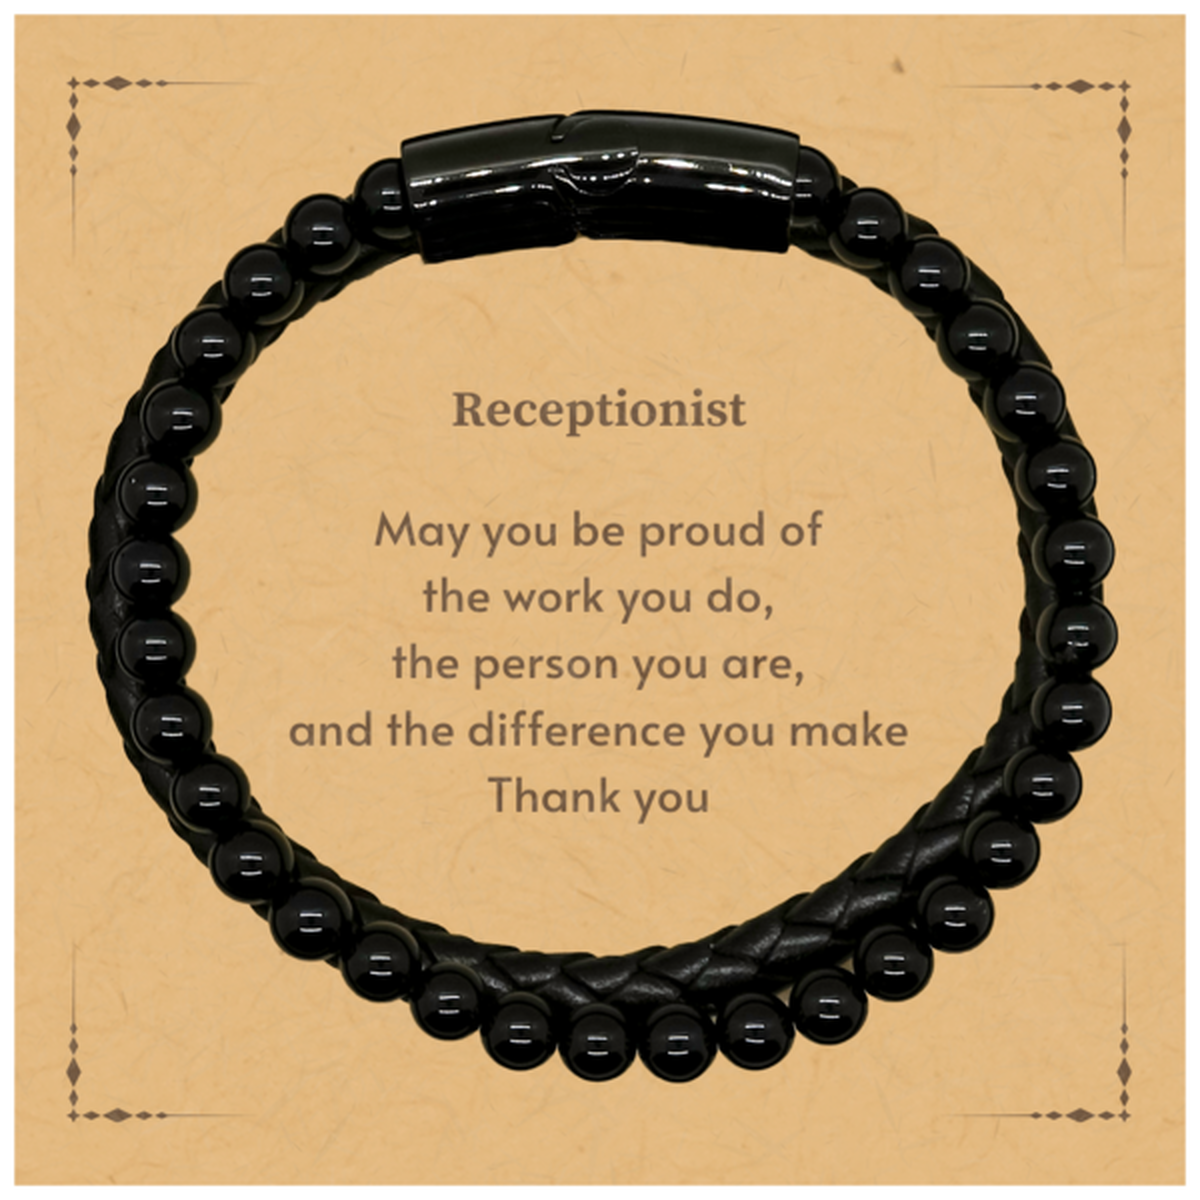 Heartwarming Stone Leather Bracelets Retirement Coworkers Gifts for Receptionist, Receptionist May You be proud of the work you do, the person you are Gifts for Boss Men Women Friends